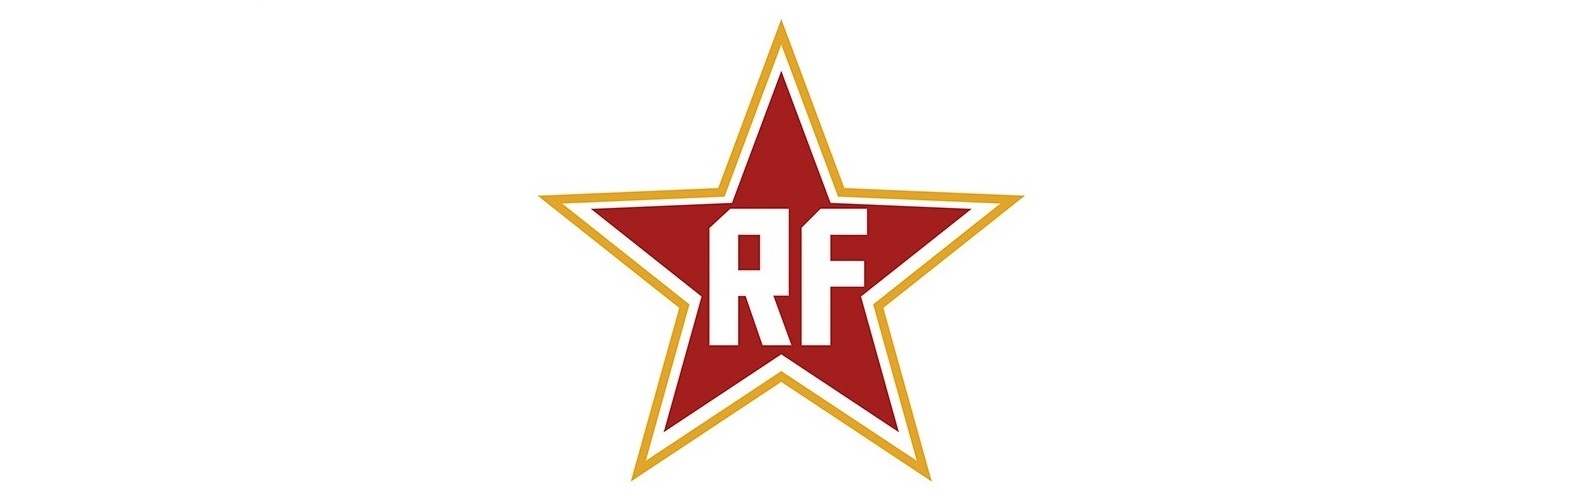 Rock and Films logo podcast